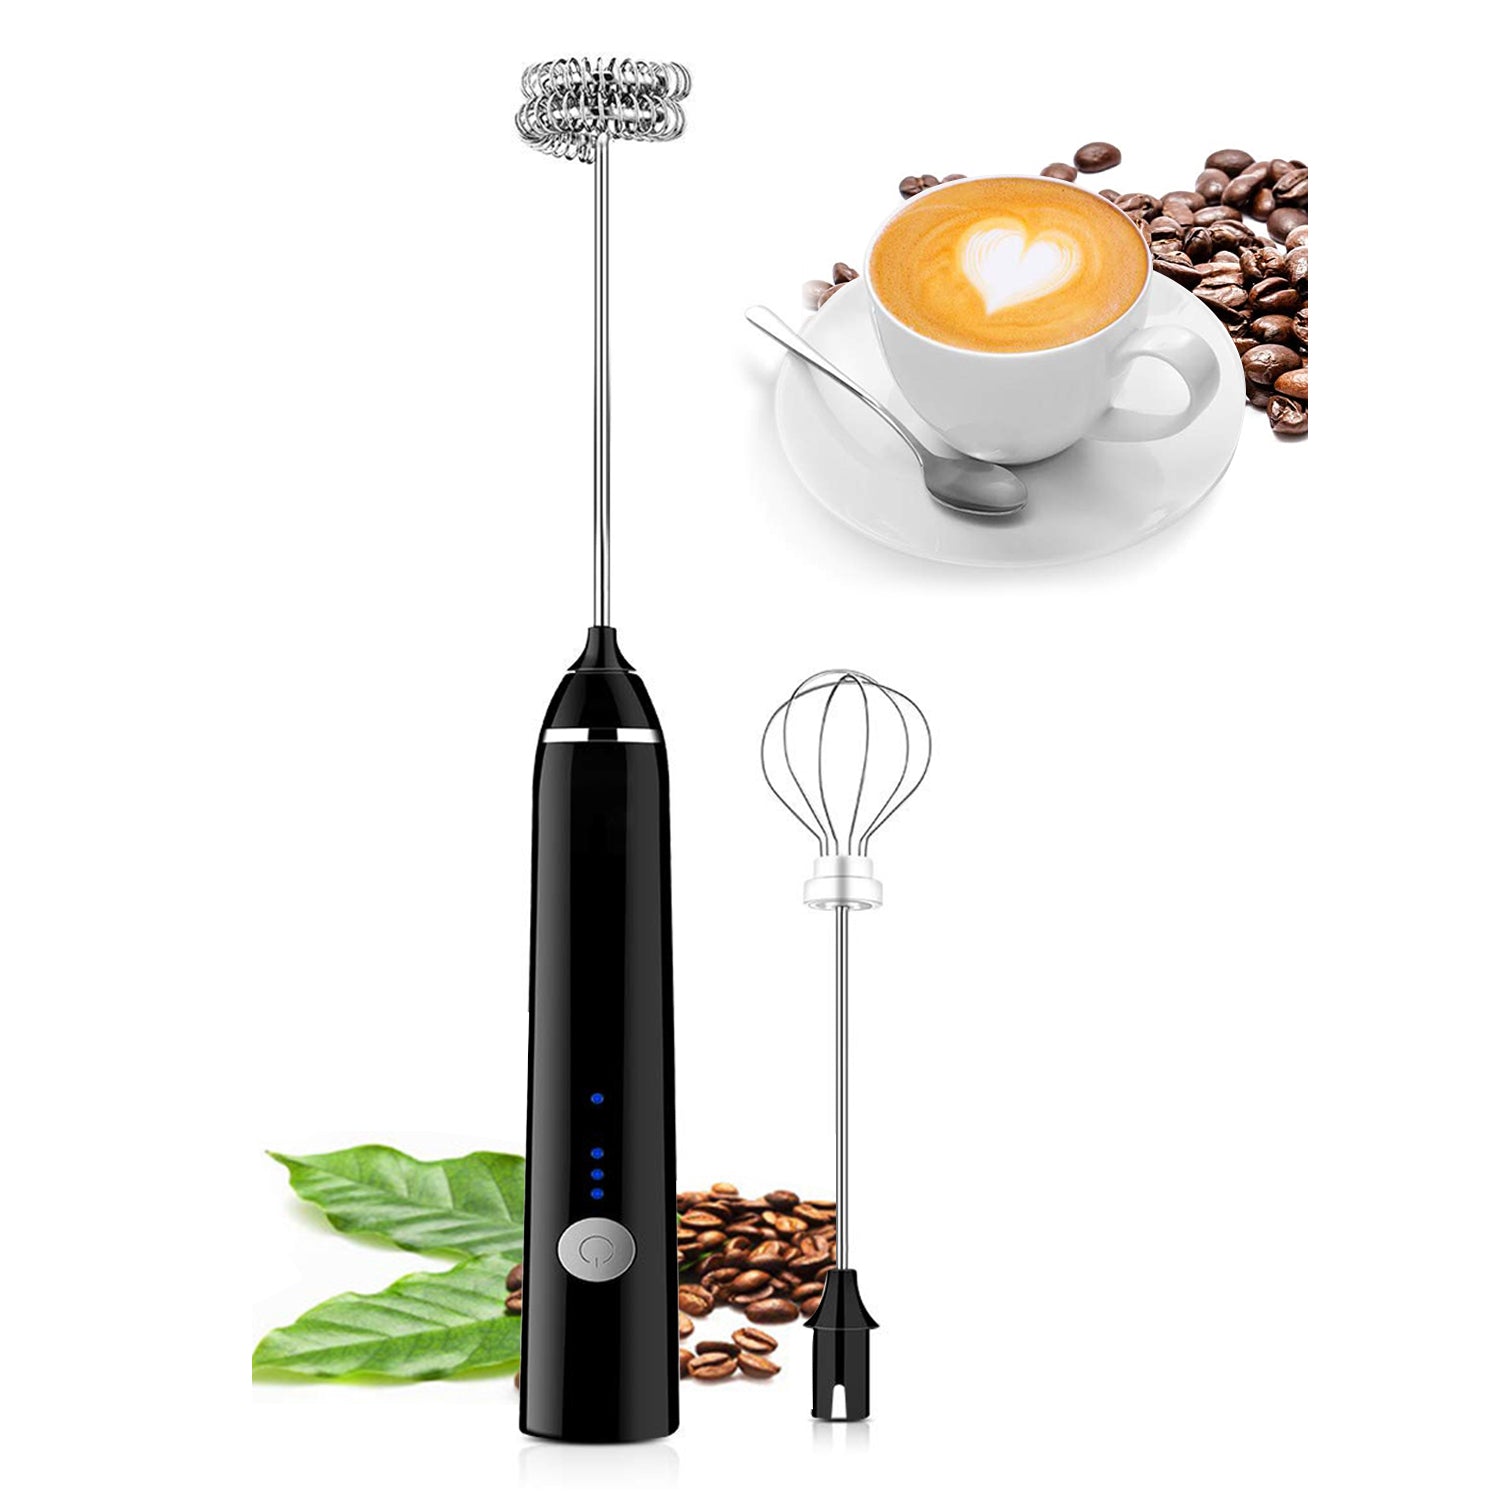 USB Rechargeable Milk Frother Handheld Multi-functional Electric Foam Maker  with 2 Stainless Whisks,3-Speed Adjustable Mini Milk Foamer for Blending